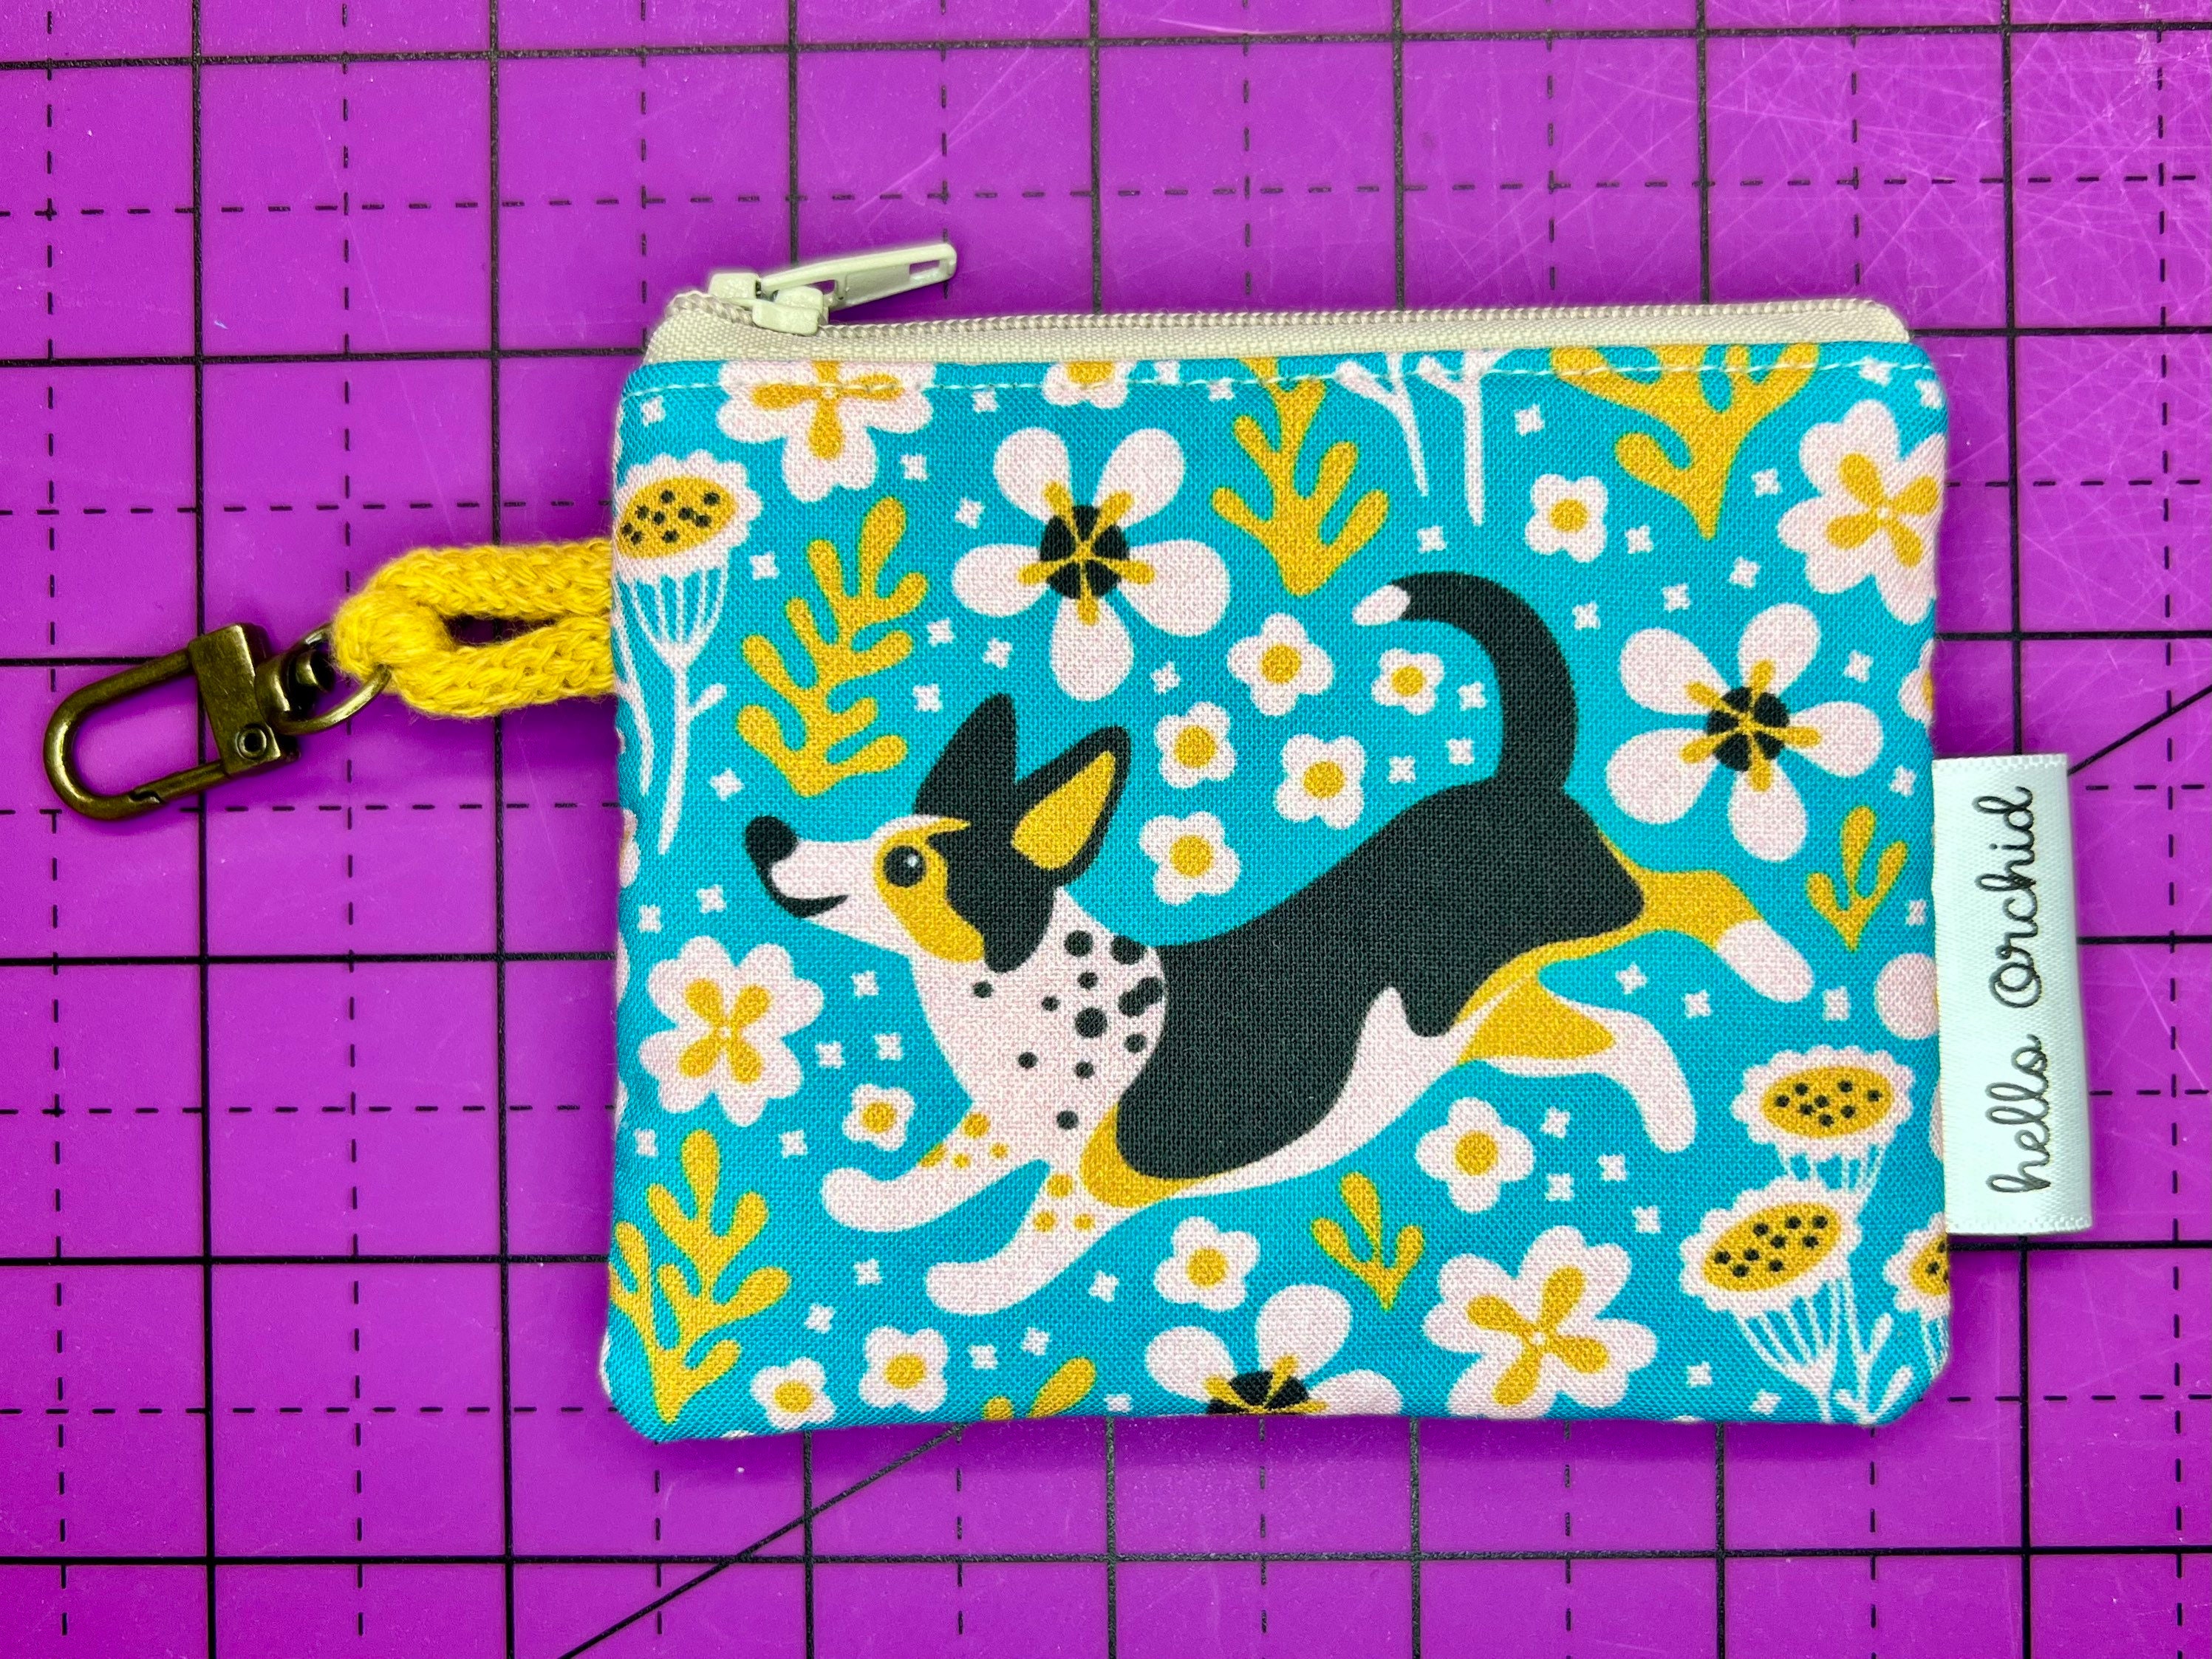 Flower Designer Puppy Keychain Wallet With Coin Holder Fashionable Purse  From B2b_sellers_shop, $3.17